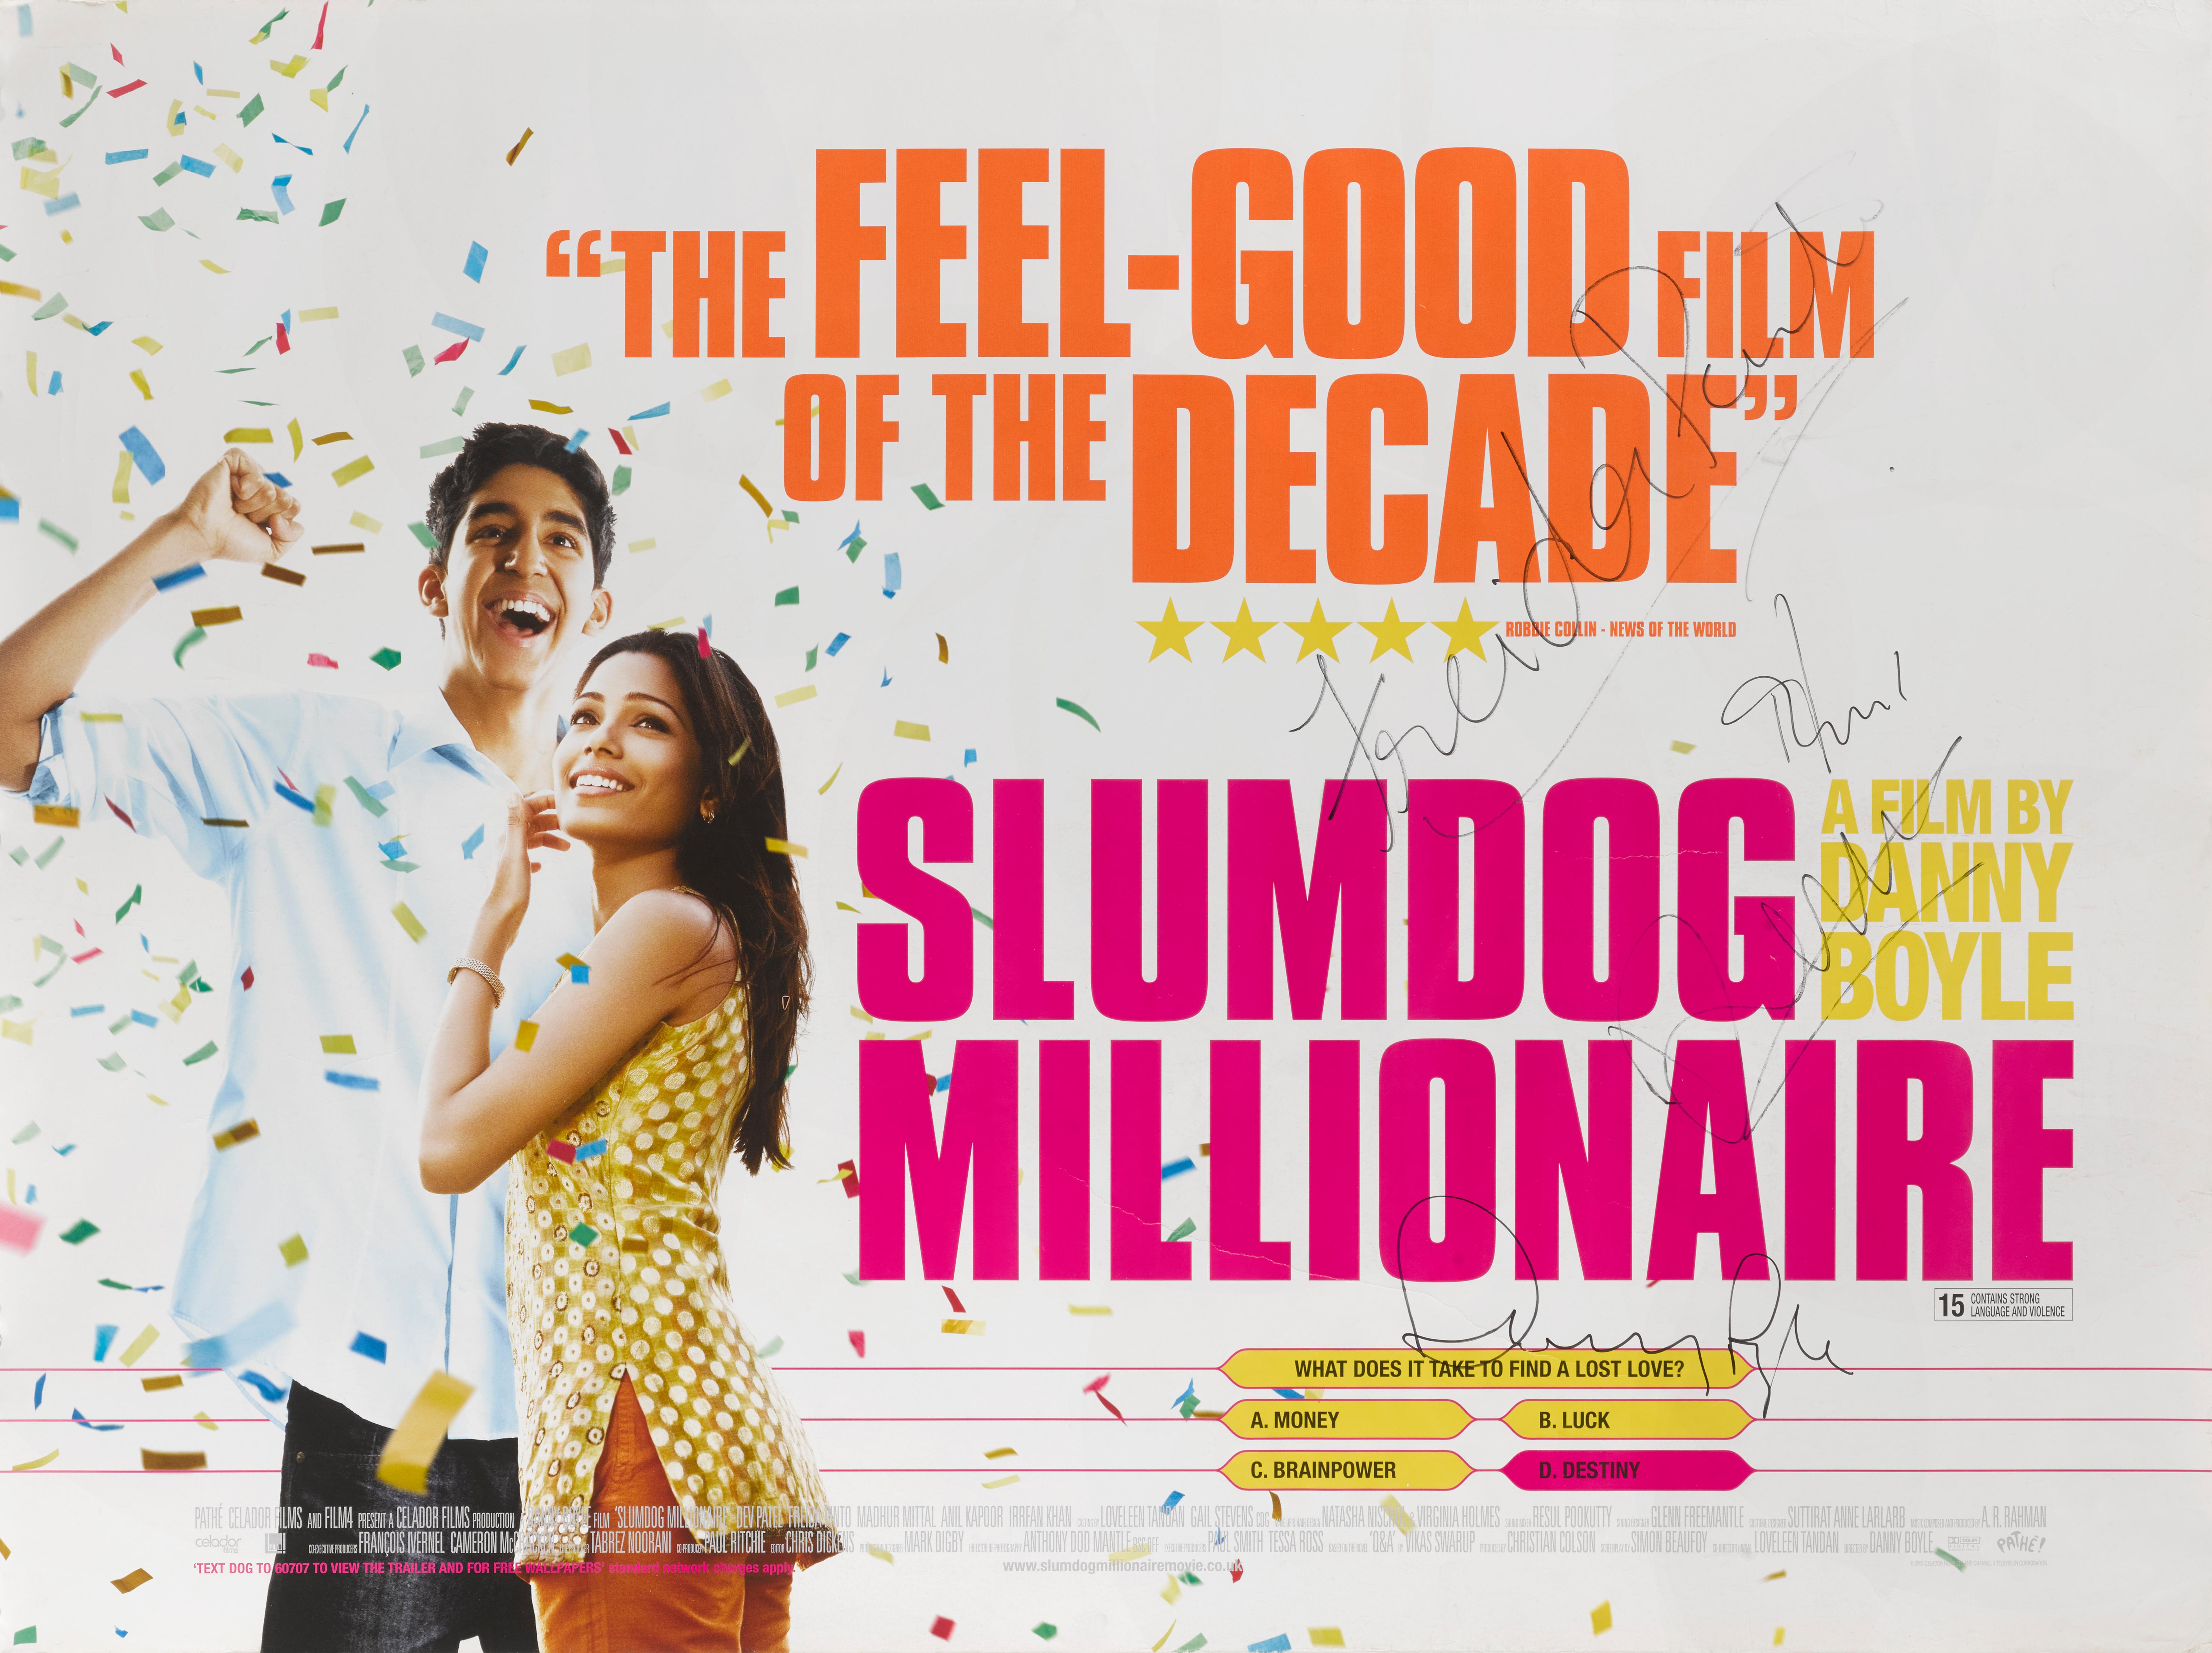 Original British film poster for Slumdog Millionaire This film was directed by Danny Boyle and Loveleen Tanda (co-director). The film is a broad adaptation of the novel Q & A (2005) by Vikas Swarup. The cast includes Dev Patel, Freida Pinto and